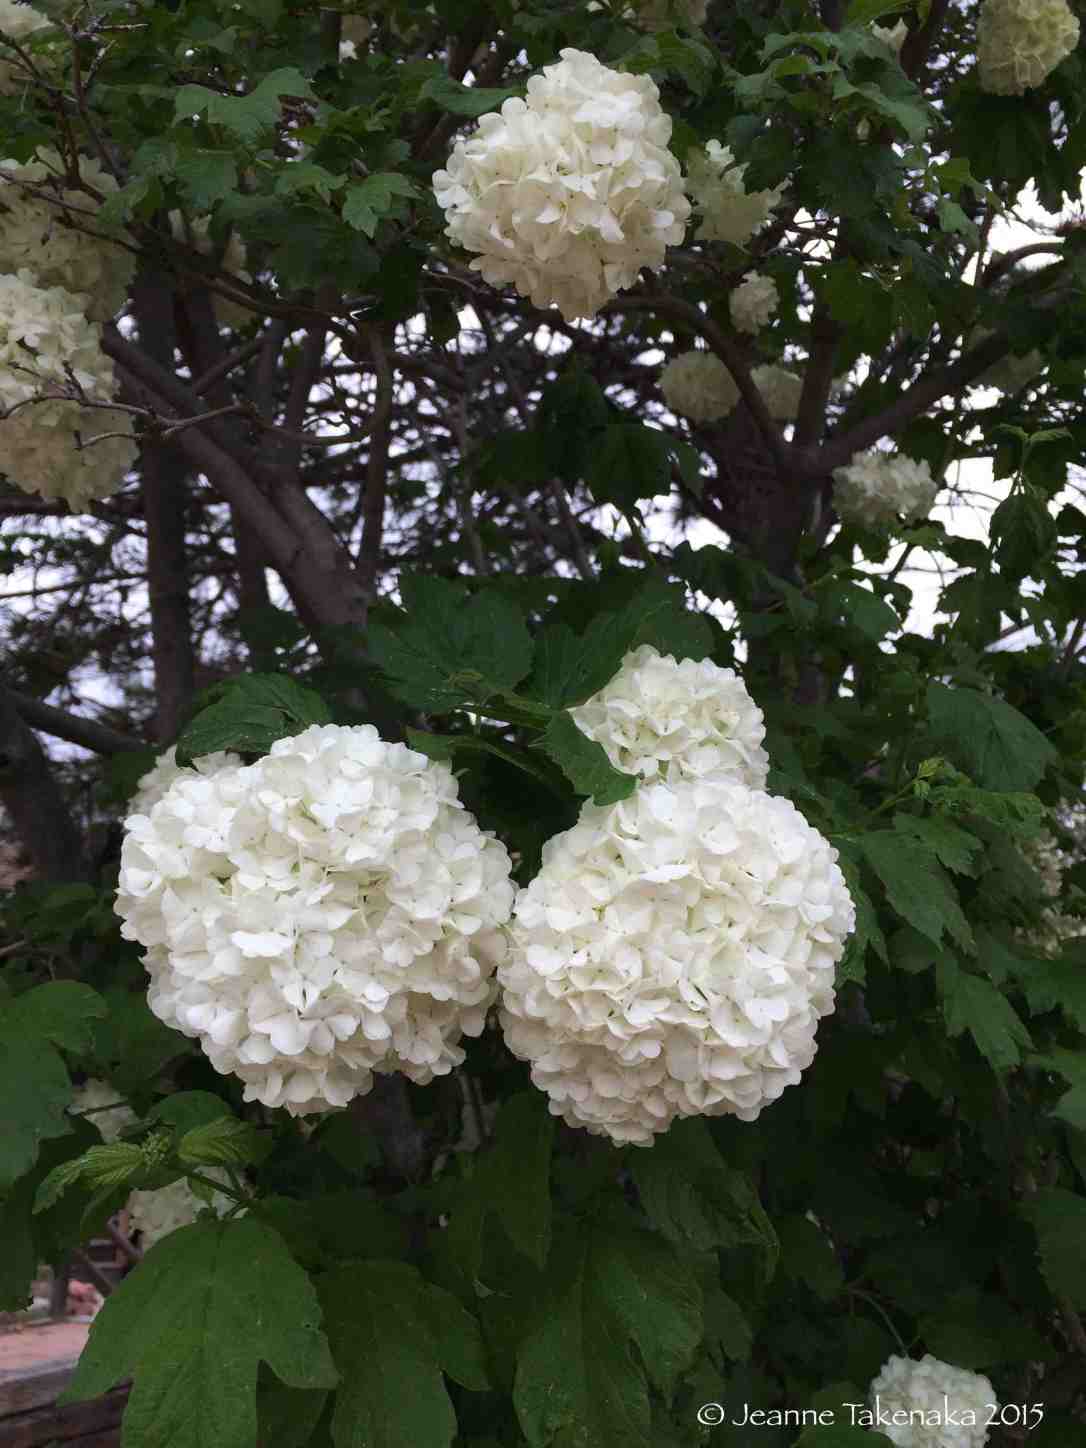 Snowball clusters